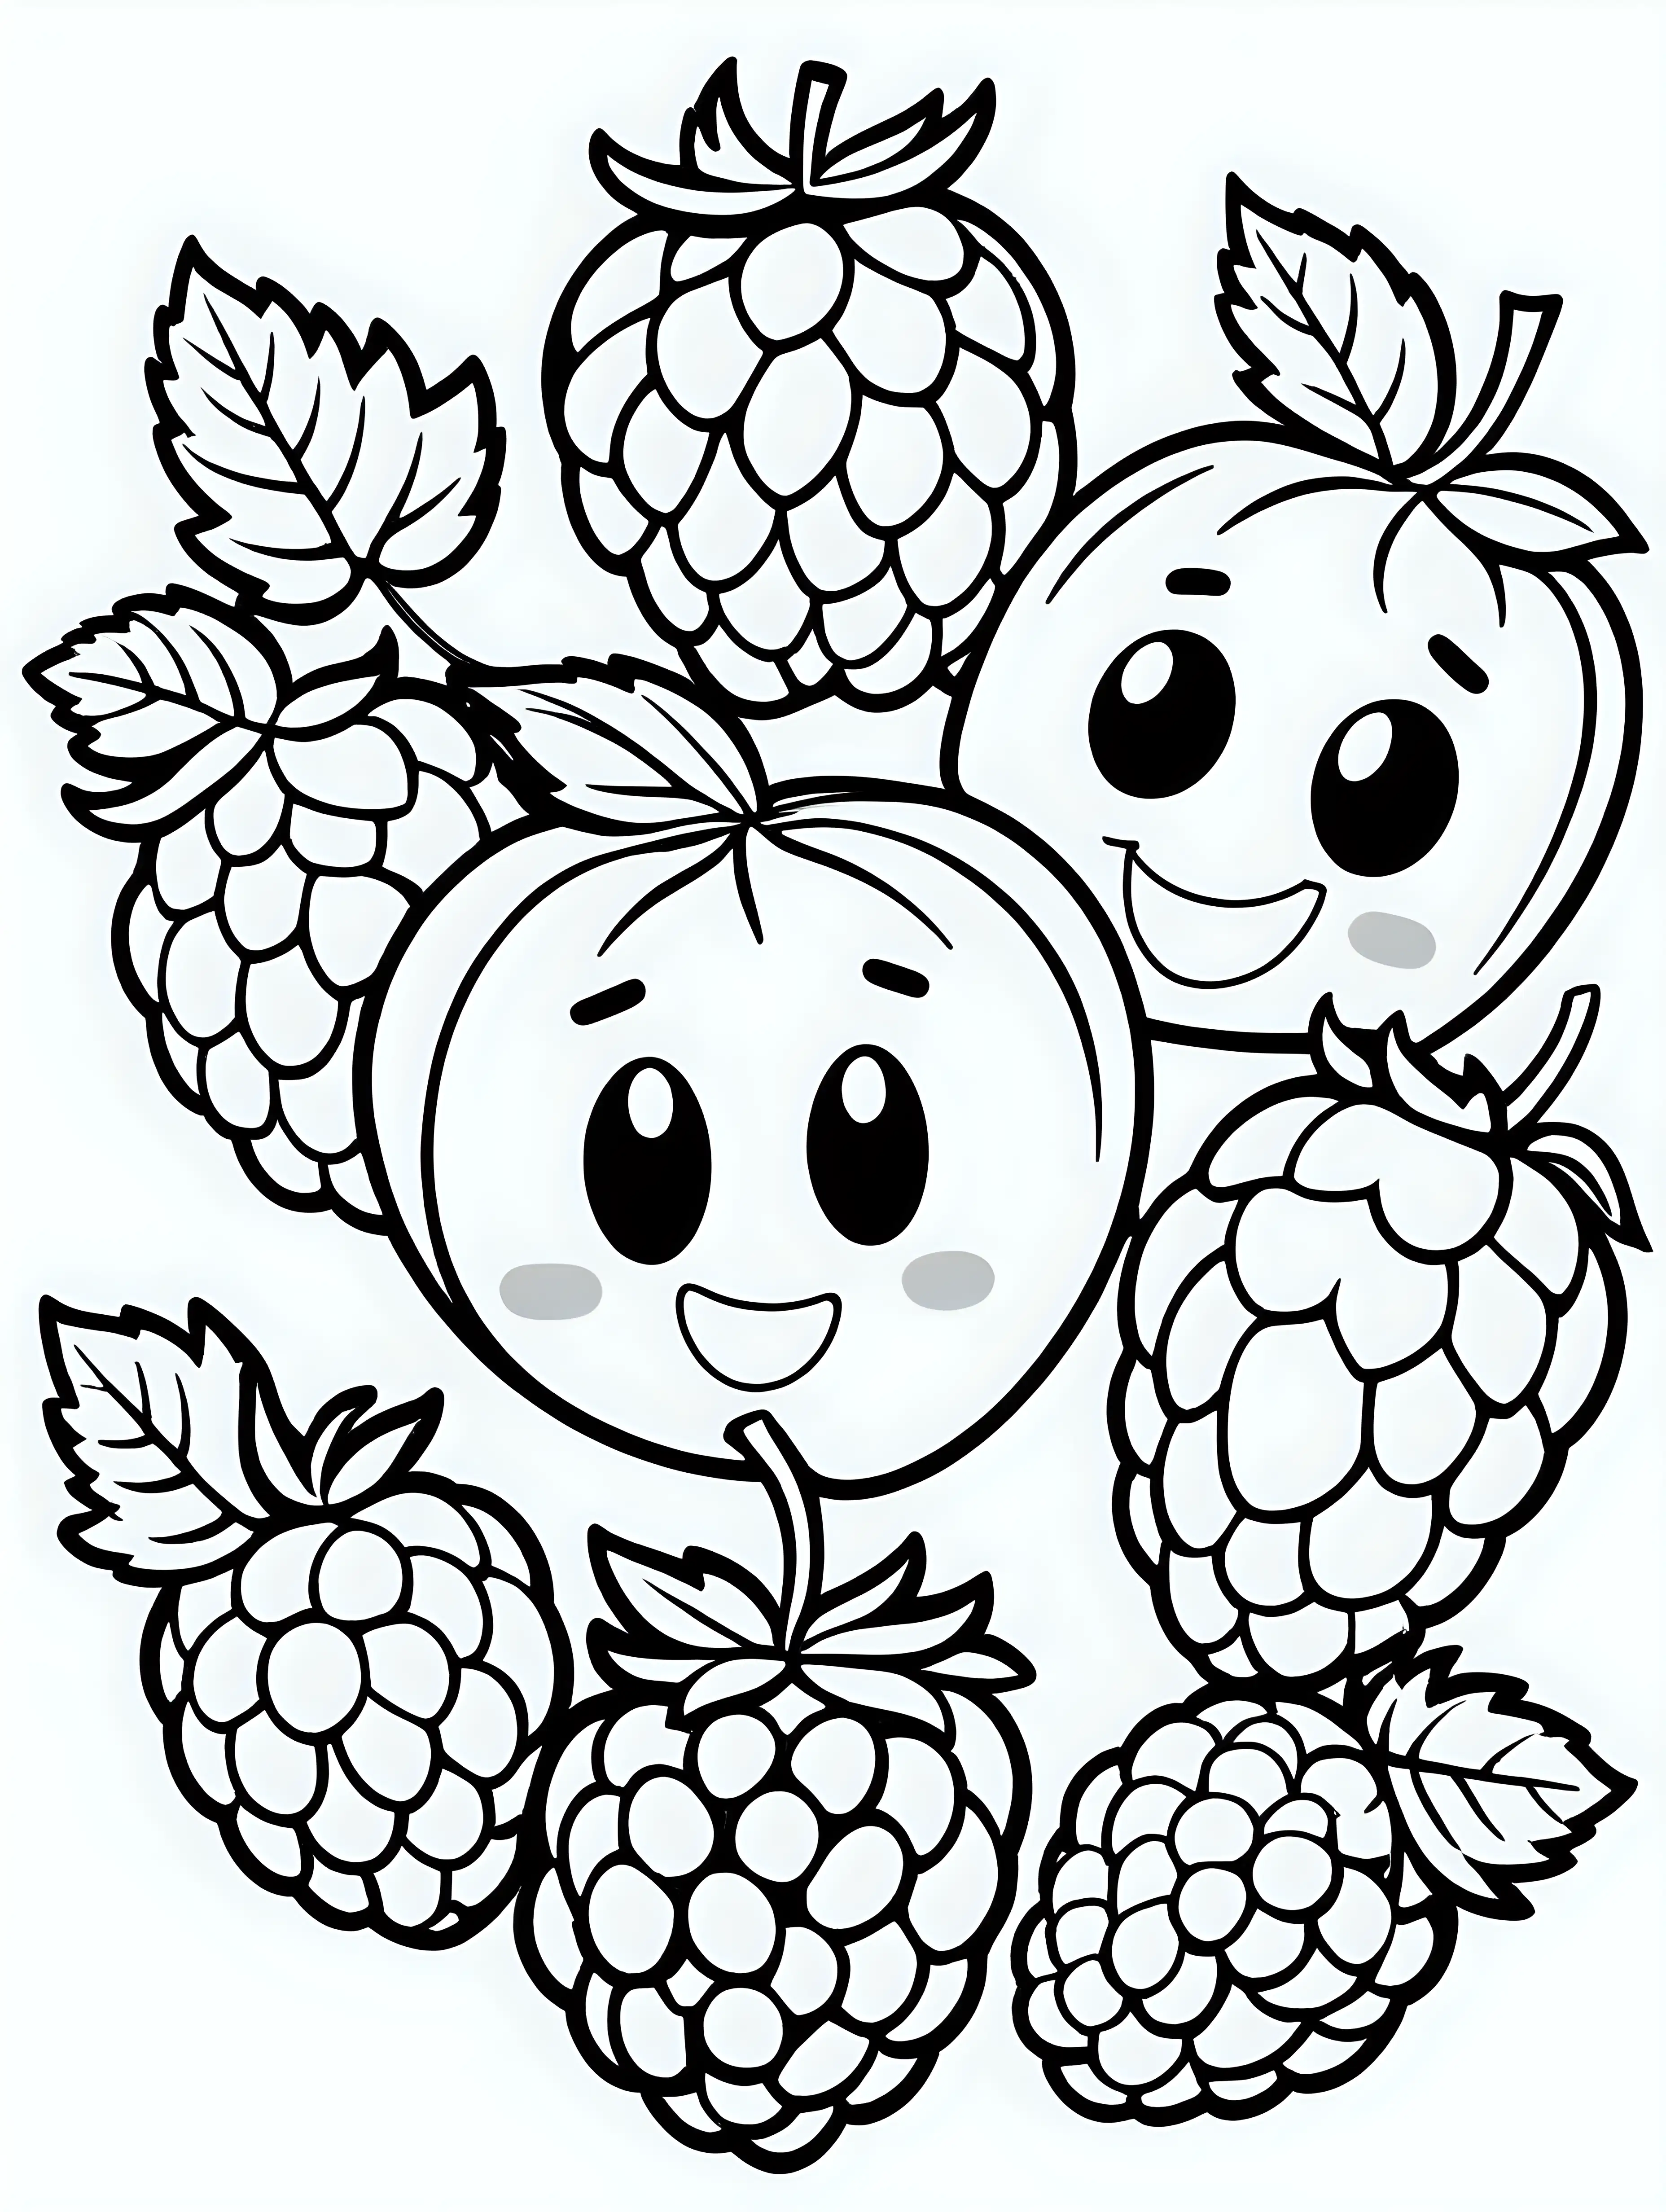 Adorable Raspberry Emojis Playful Cartoon Drawing in Clean Black and White